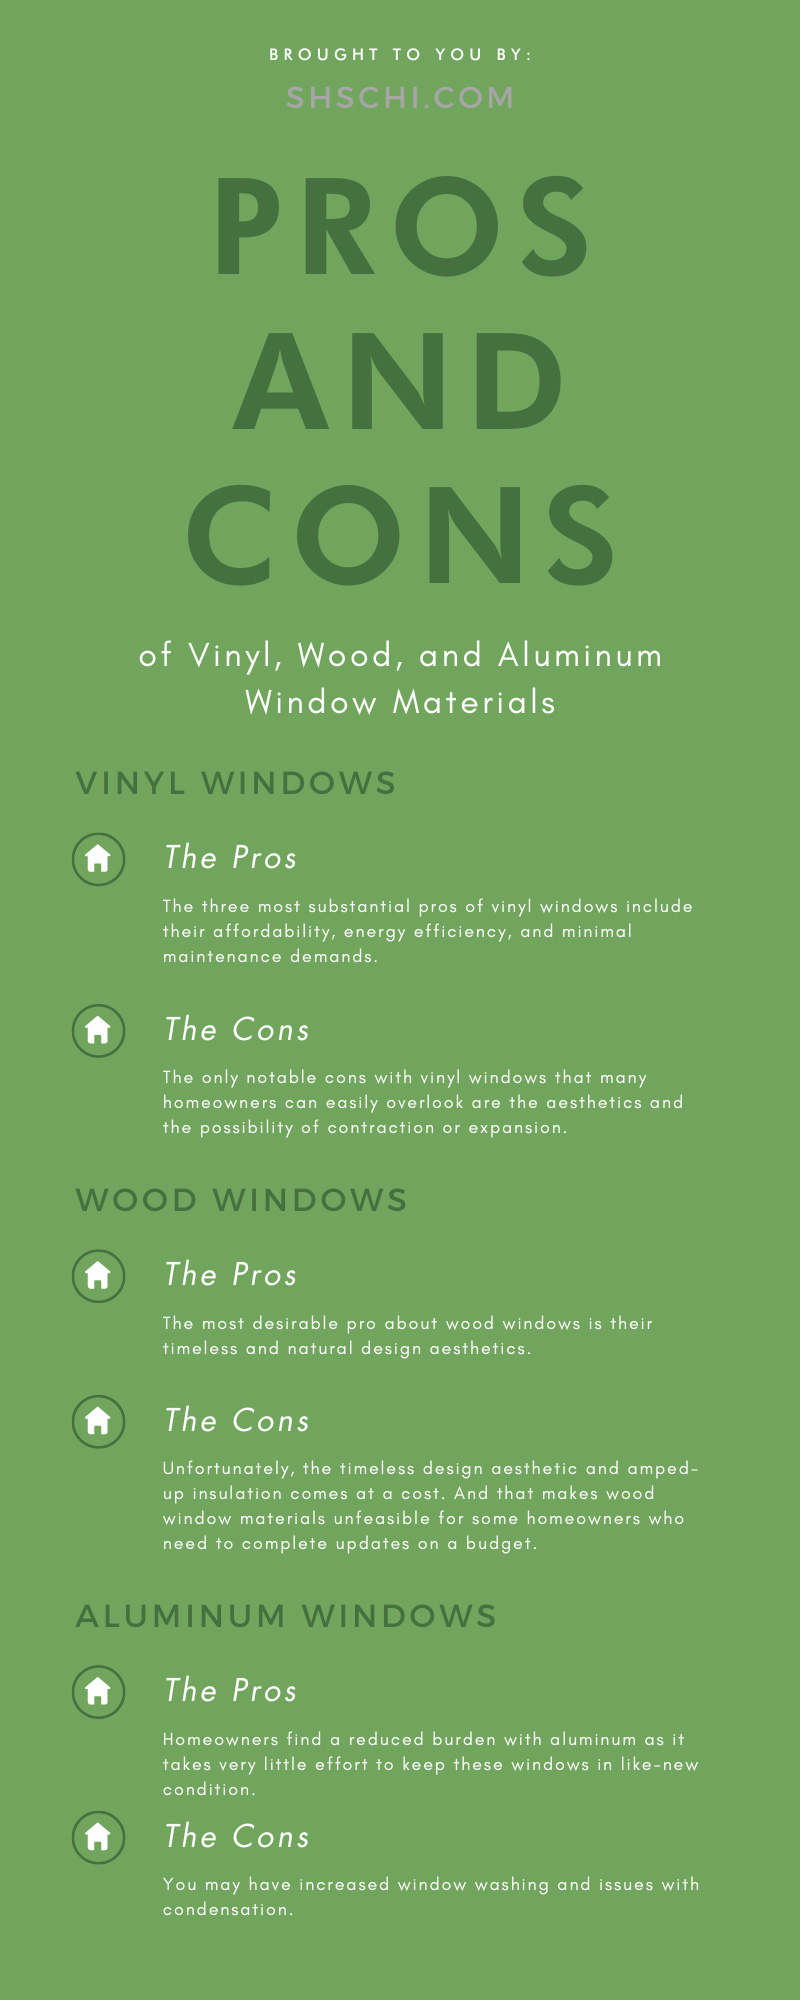 Pros and Cons of Vinyl, Wood, and Aluminum Window Materials